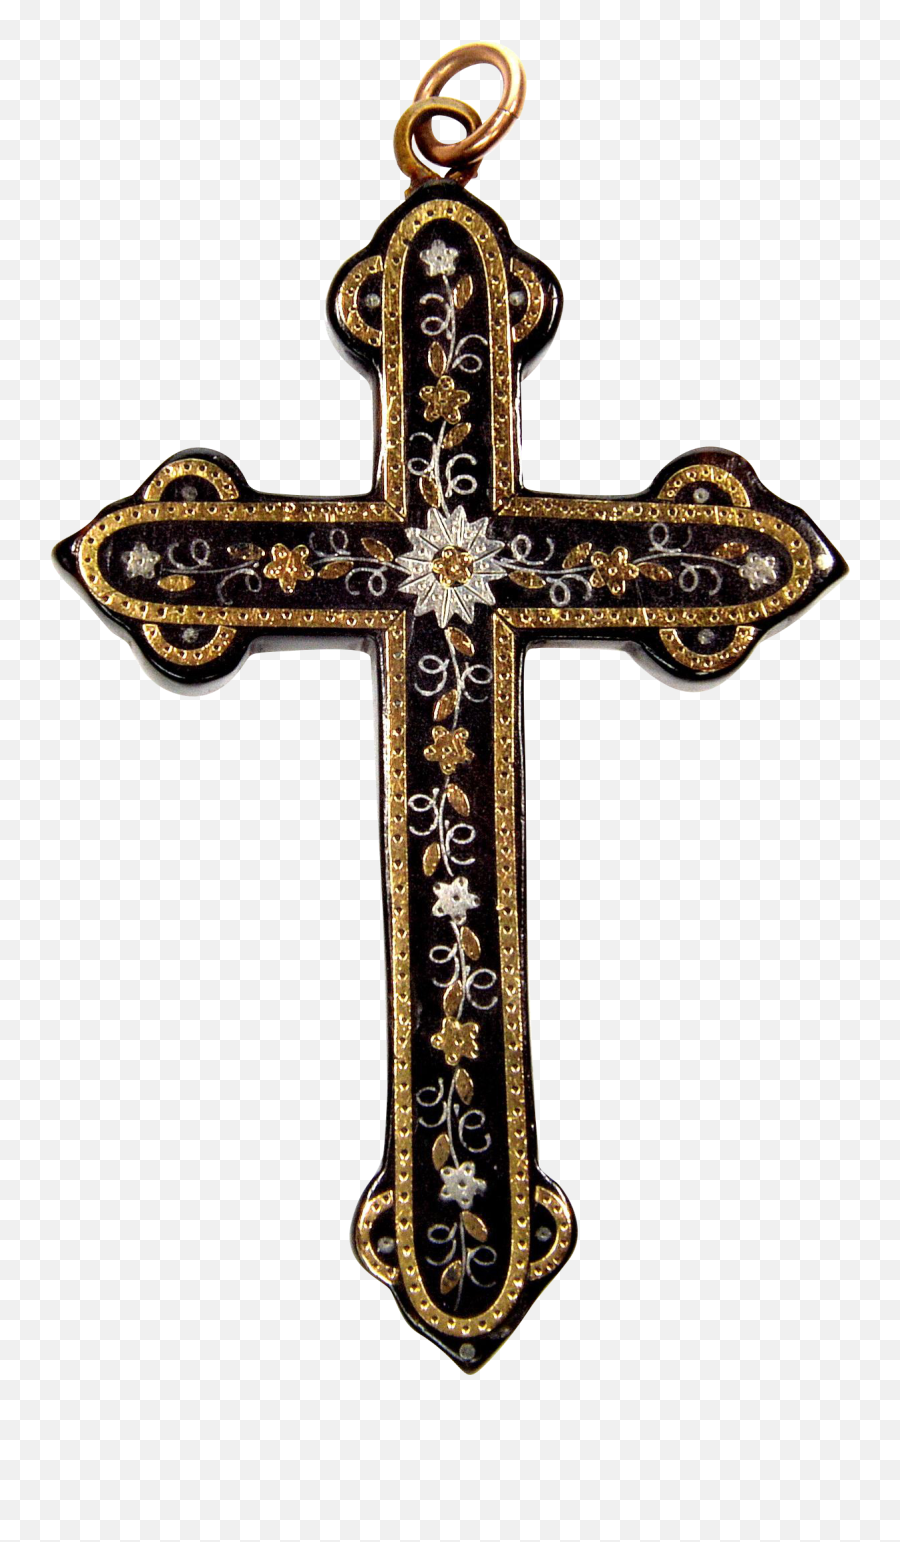 Silver Pique Cross Pendant - Pique Cross With Gold Inlay Emoji,Gold Cross Png